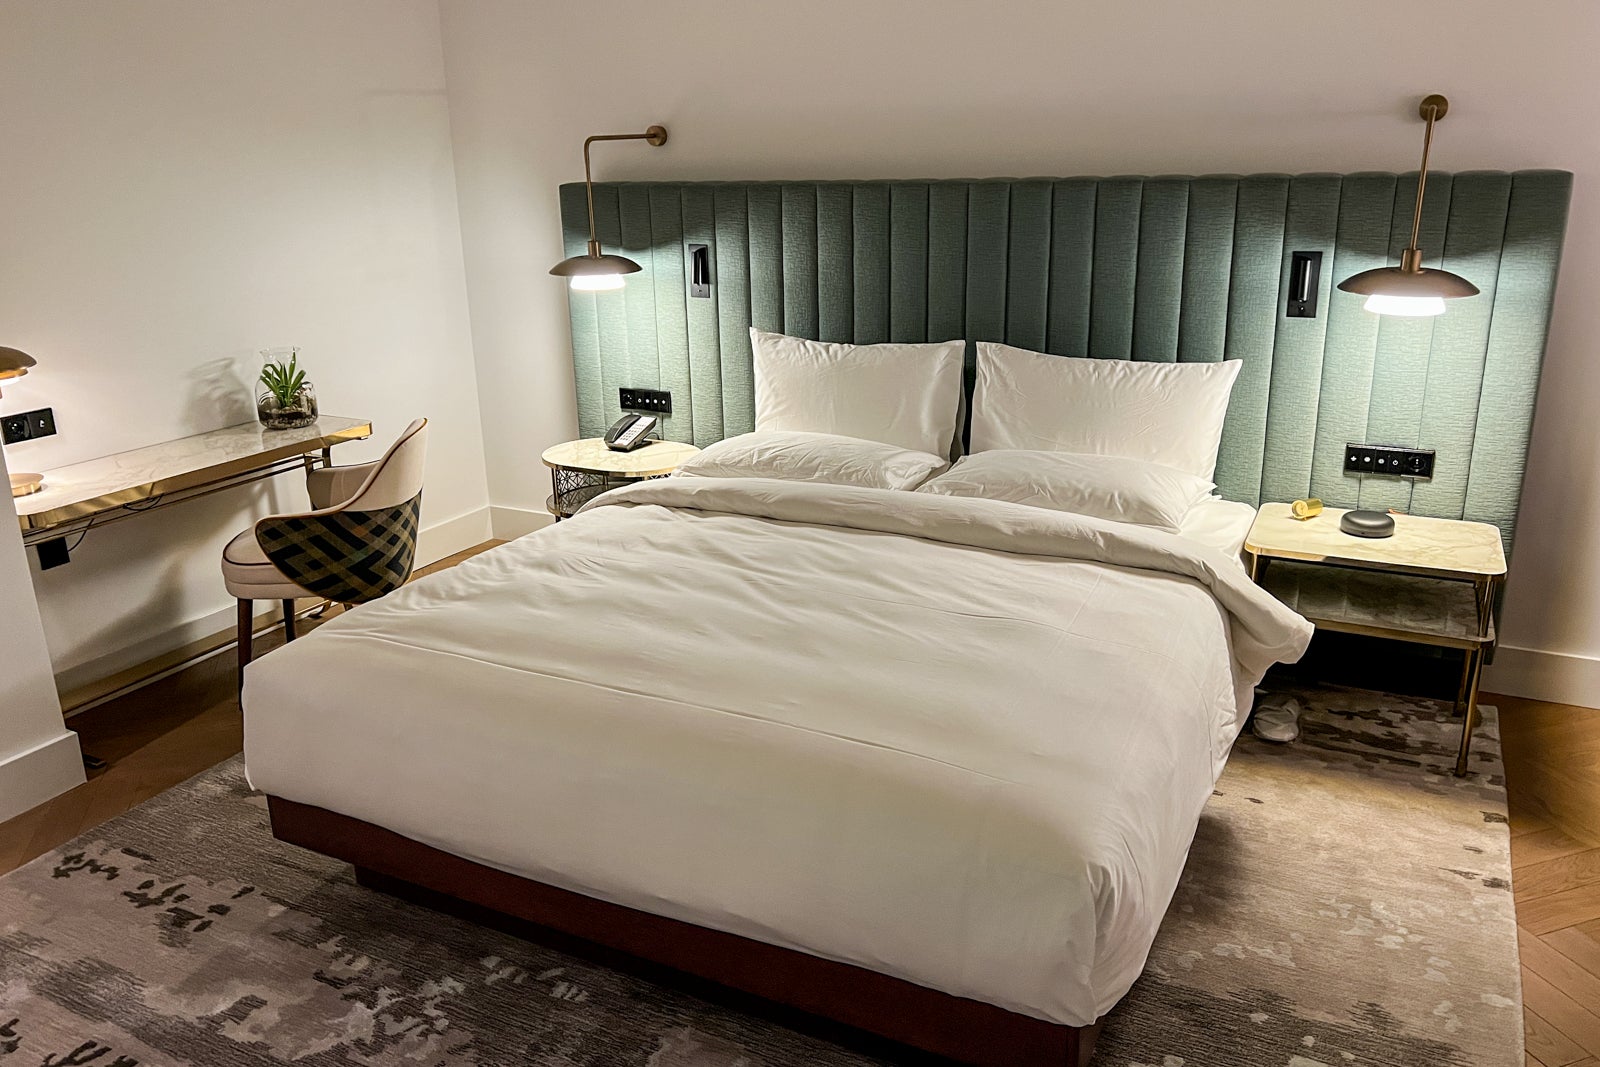 Bed and workspace at the Andaz Prague hotel